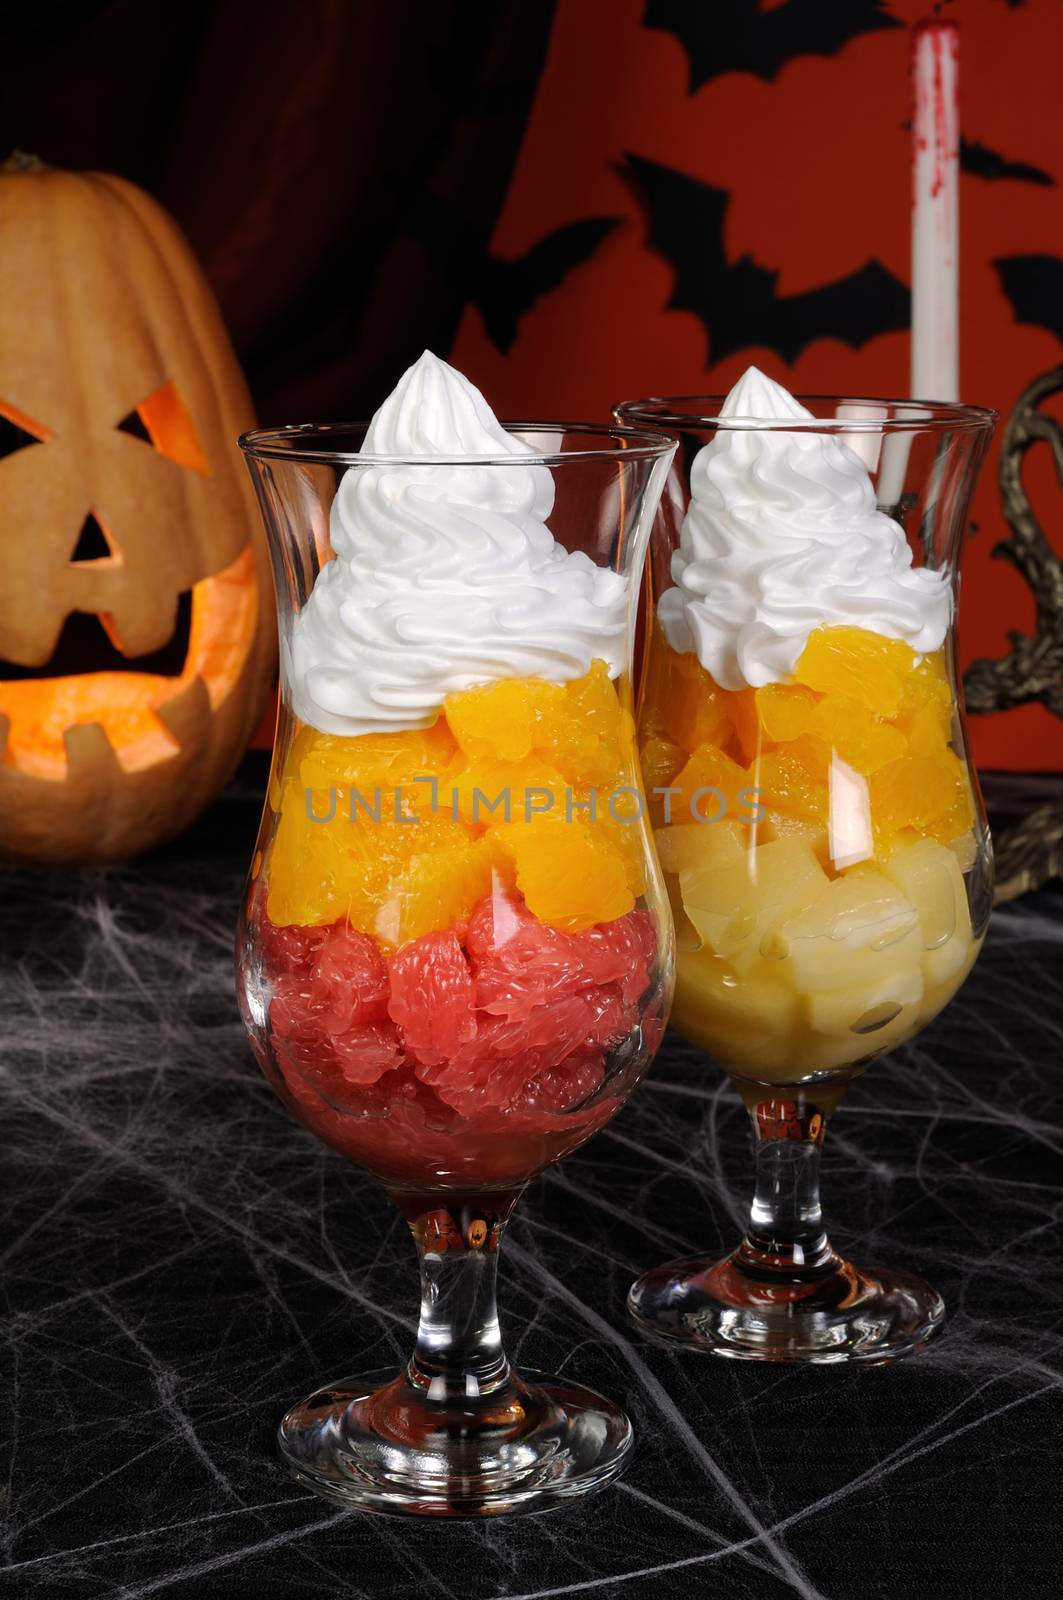  dessert for Halloween by Apolonia